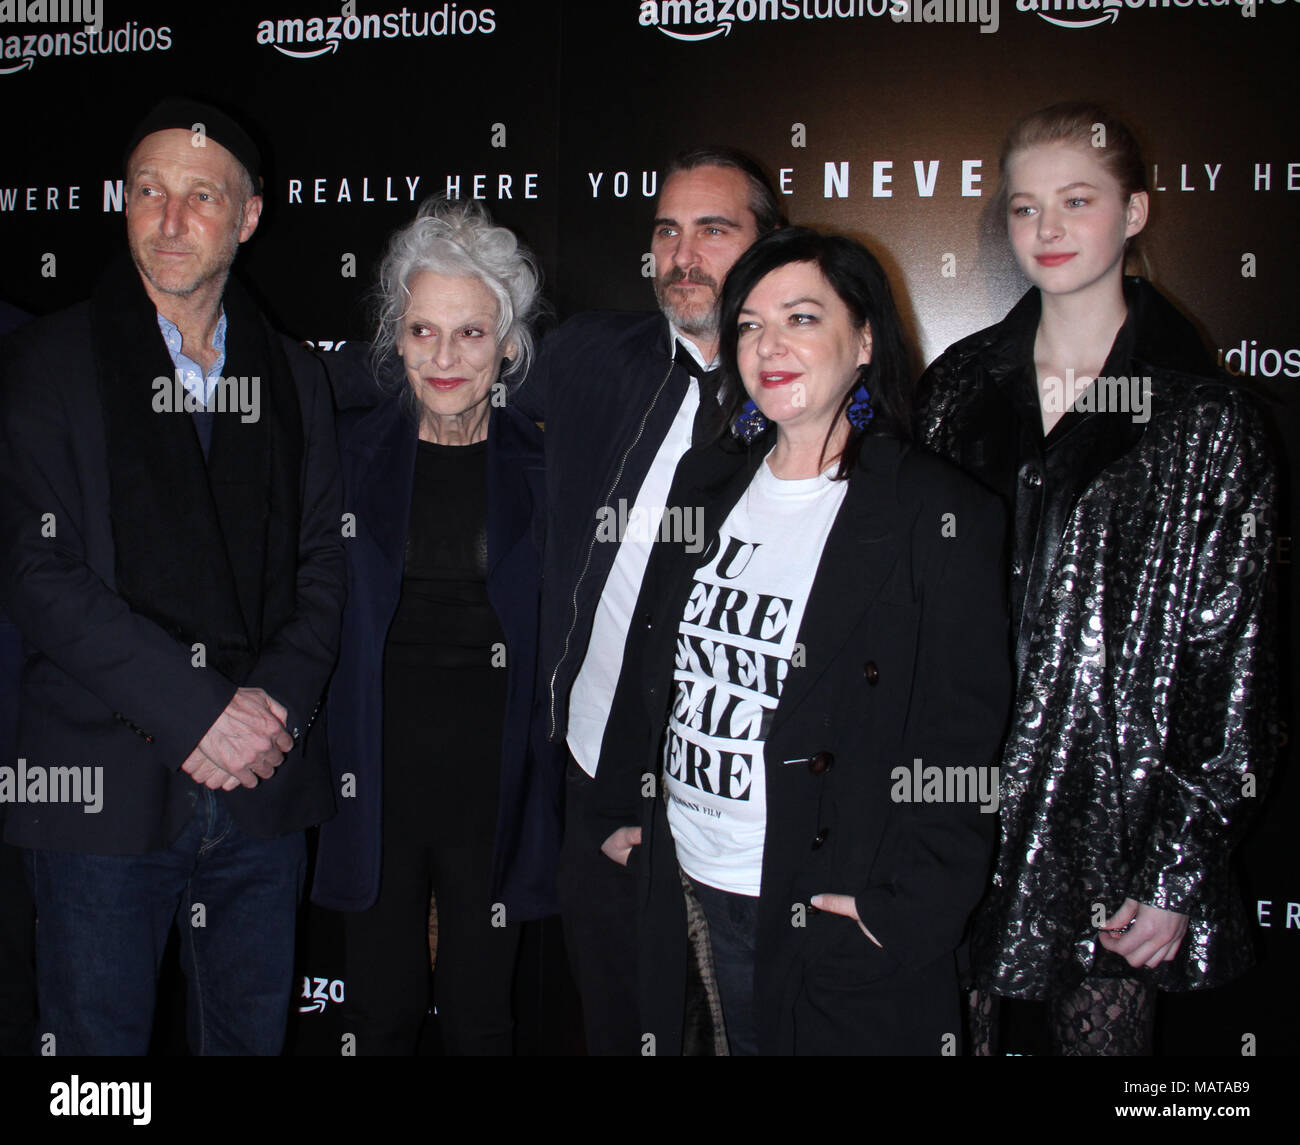 NEW YORK, NY April 03, 2018: Jonathan Ames, Judith Roberts, Joaquin Phoenix, Lynne Ramsay, Ekaterina Samsonov, attendAmazonstudios present a special screening of You Were Never Really Here at the Metrograph in New York. April 03, 2018 Credit:RW/MediaPunch Stock Photo